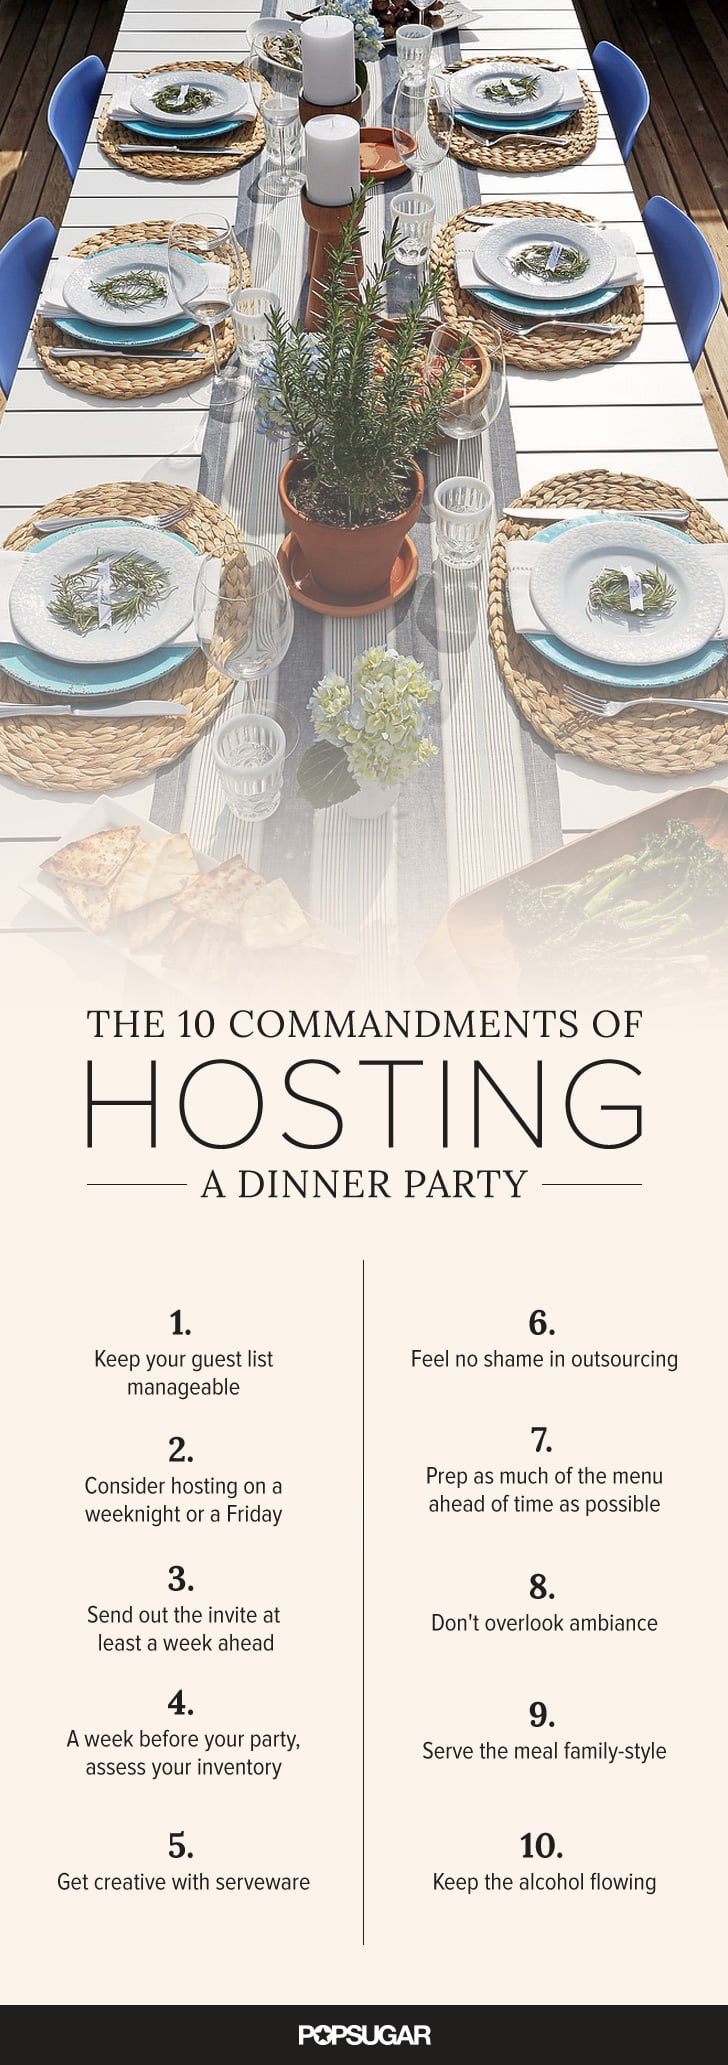 Top tips for hosting a dinner party.